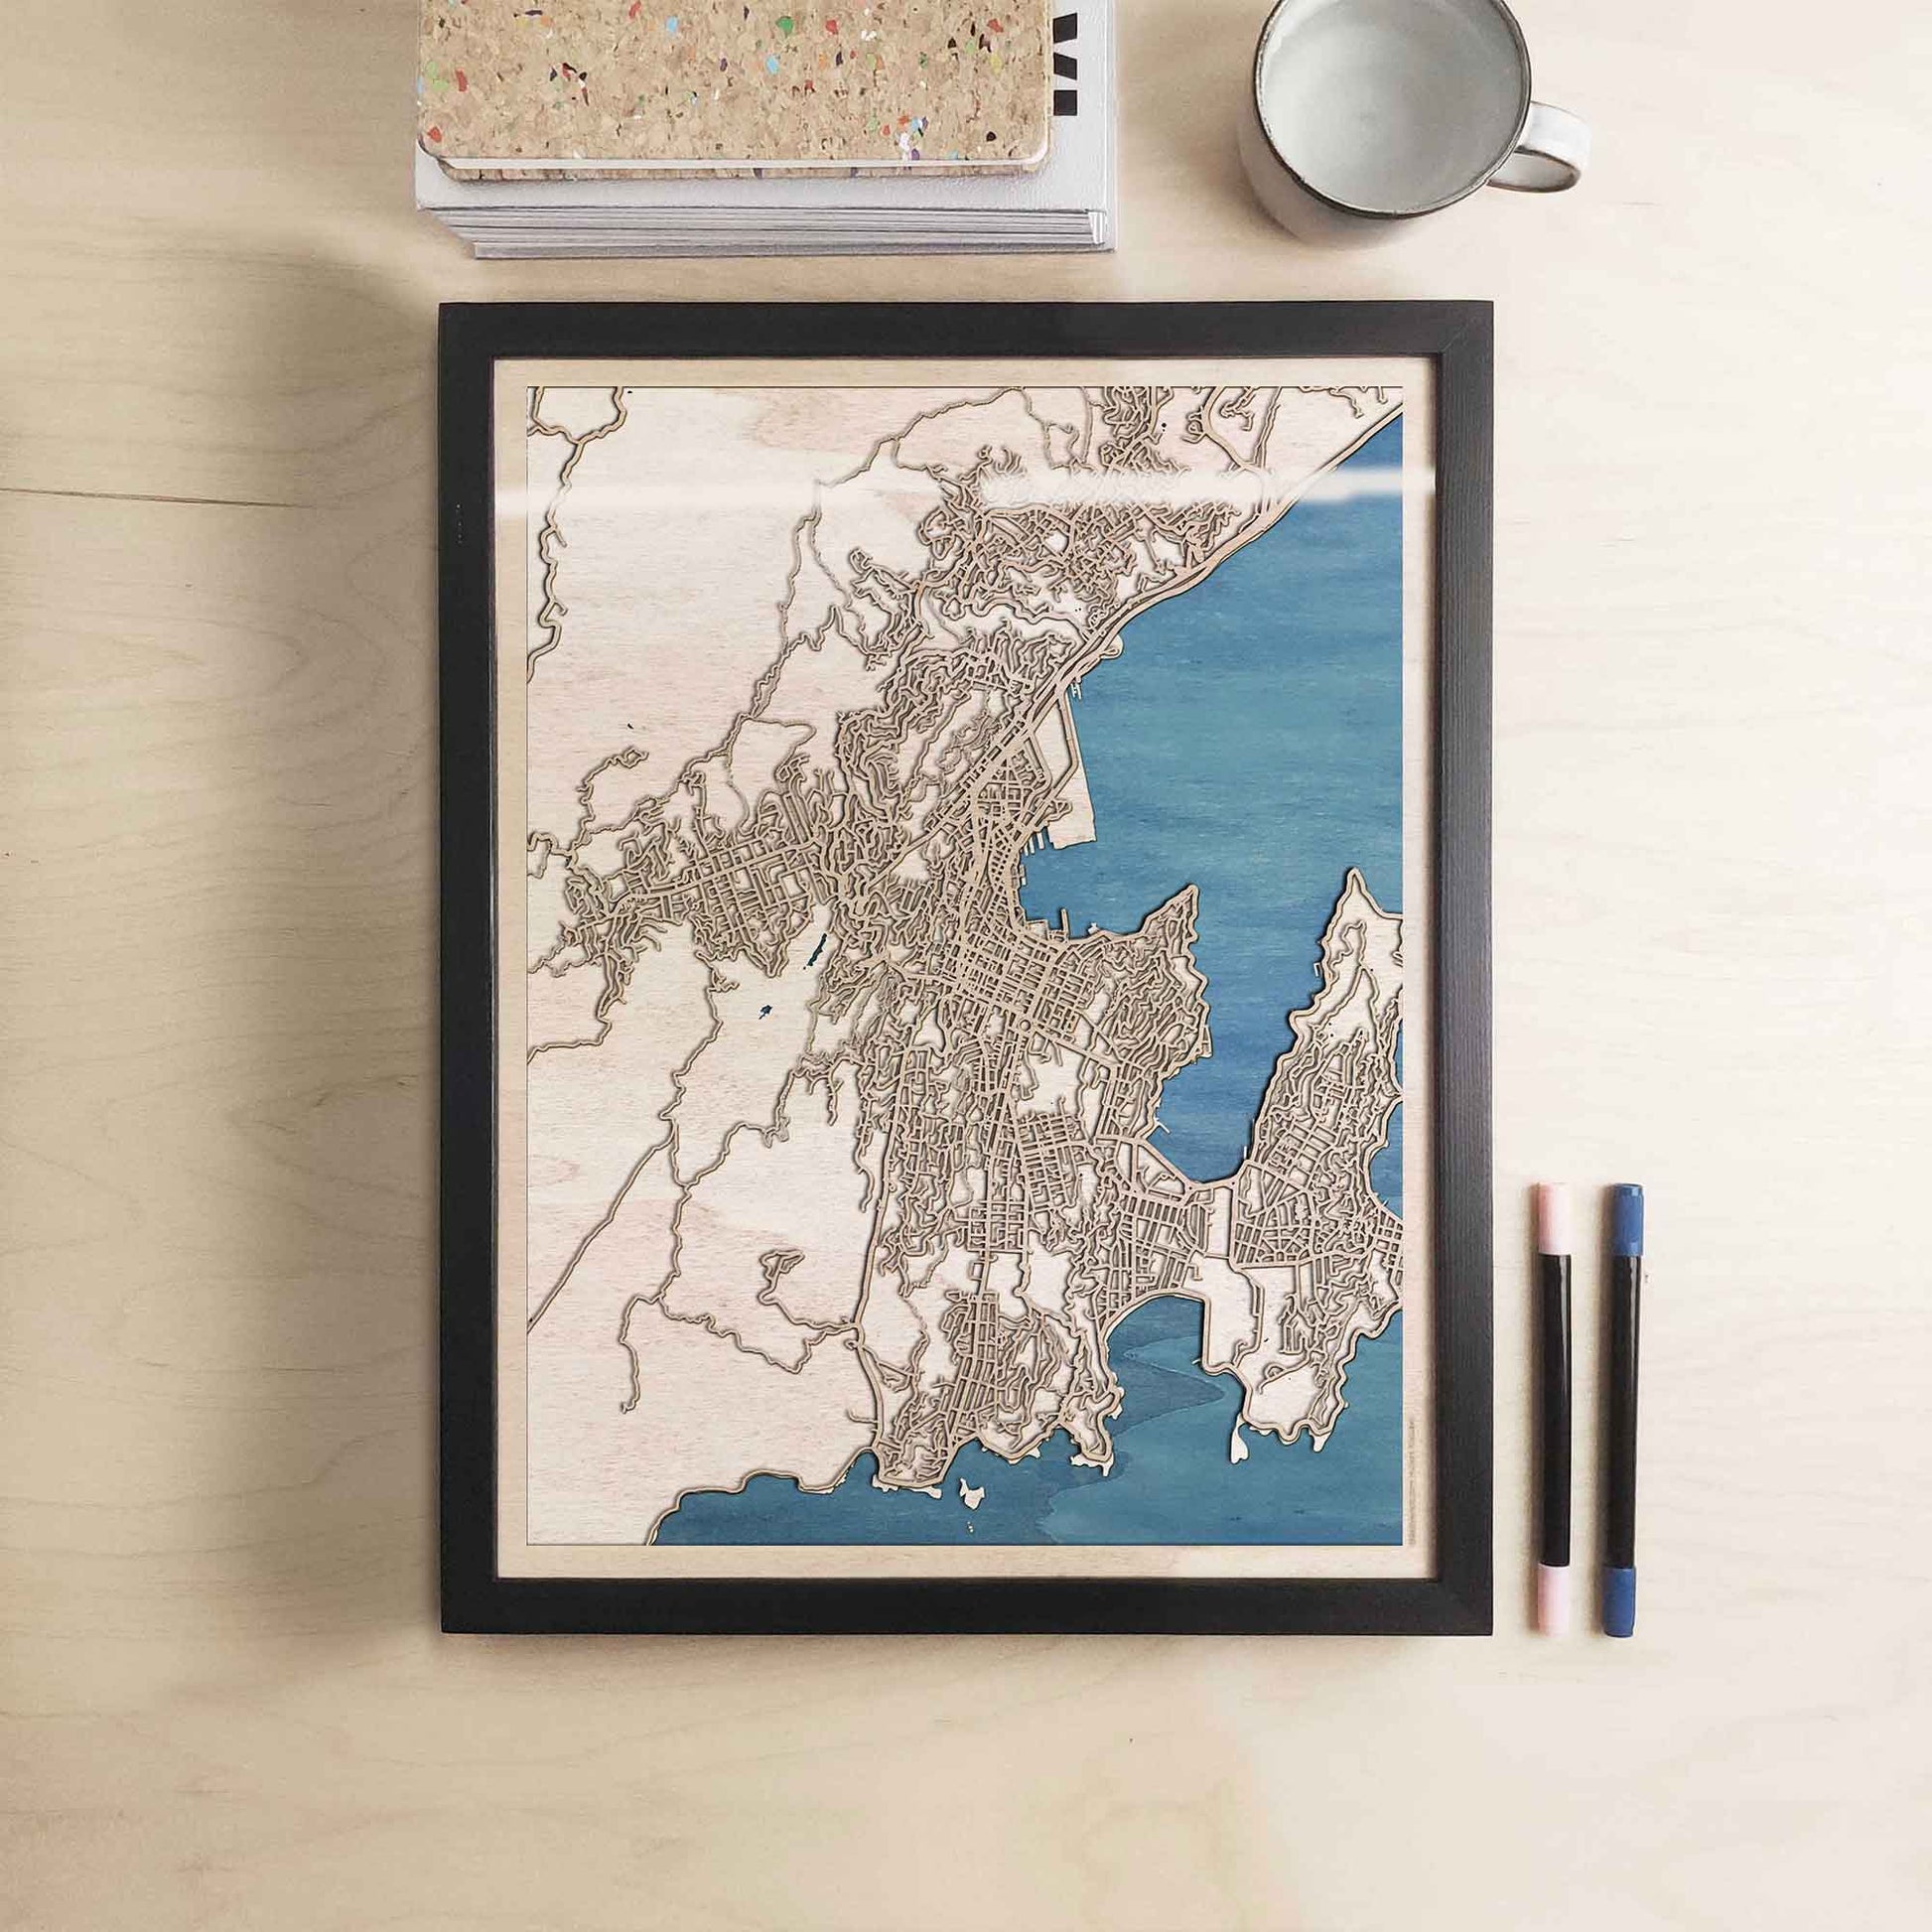 Wellington Wooden Map by CityWood - Custom Wood Map Art - Unique Laser Cut Engraved - Anniversary Gift